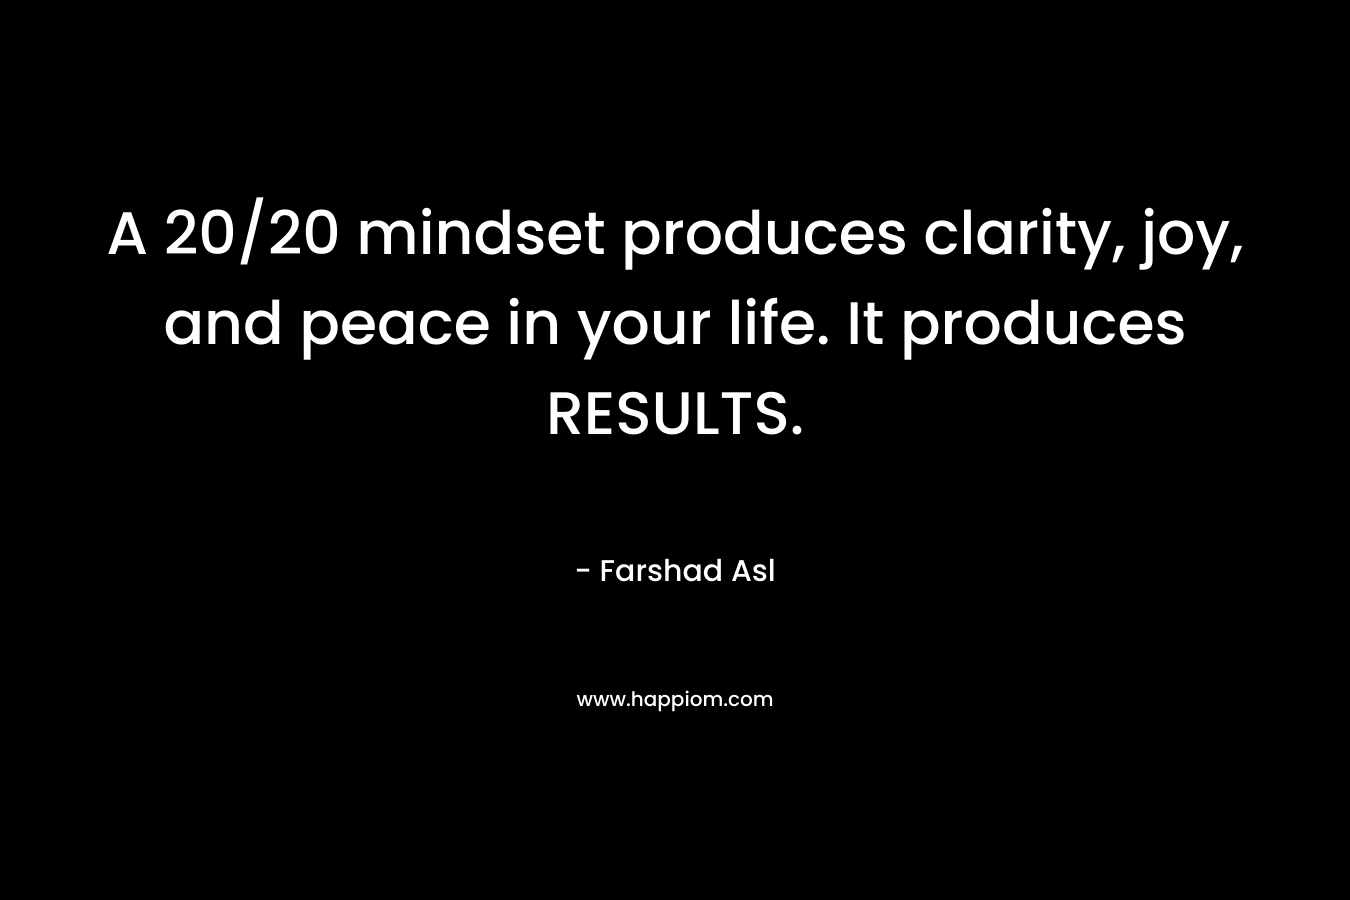 A 20/20 mindset produces clarity, joy, and peace in your life. It produces RESULTS.